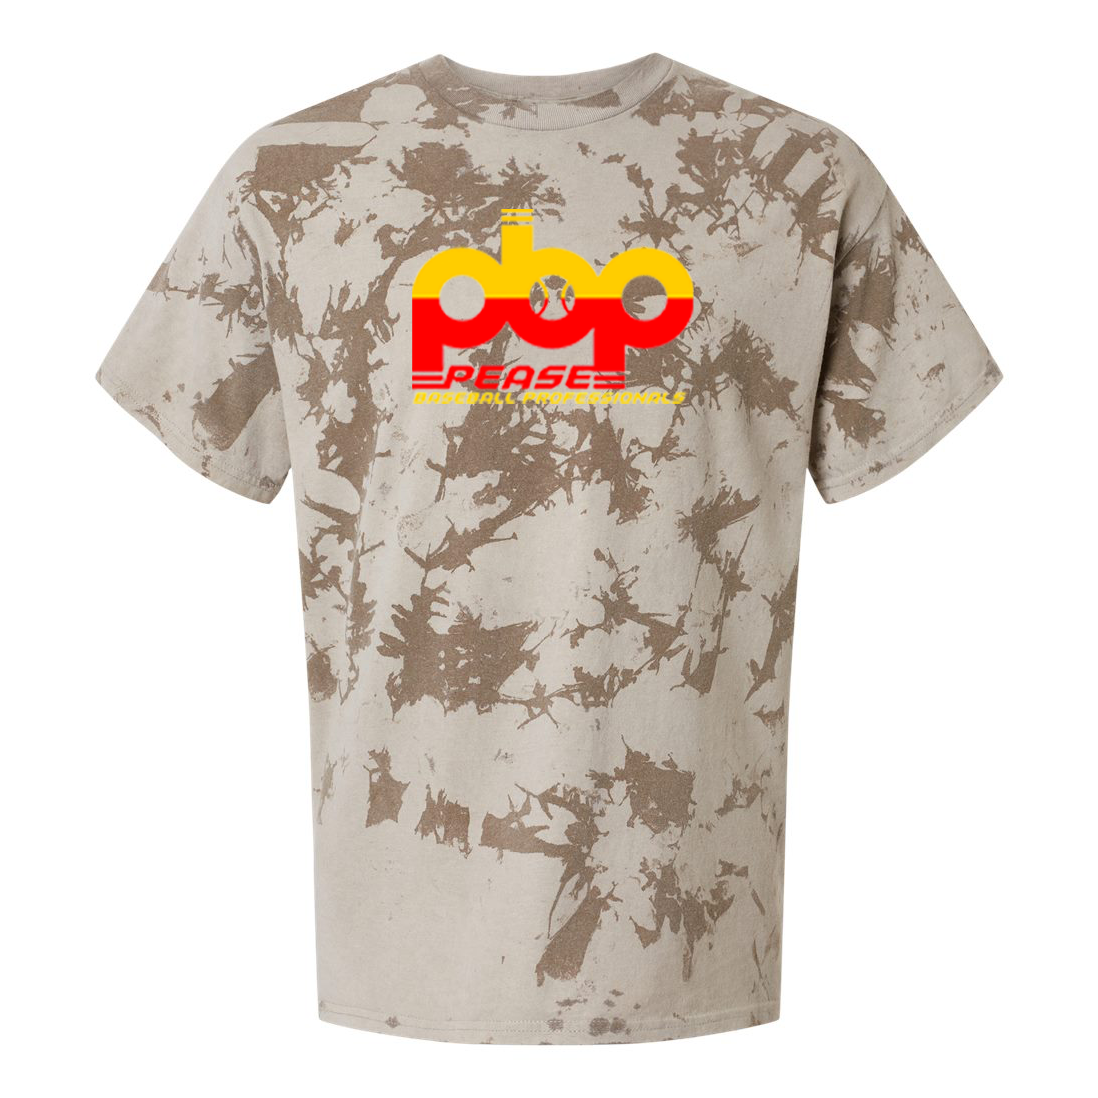 Pease Baseball Professionals Crush Tie-Dyed T-Shirt